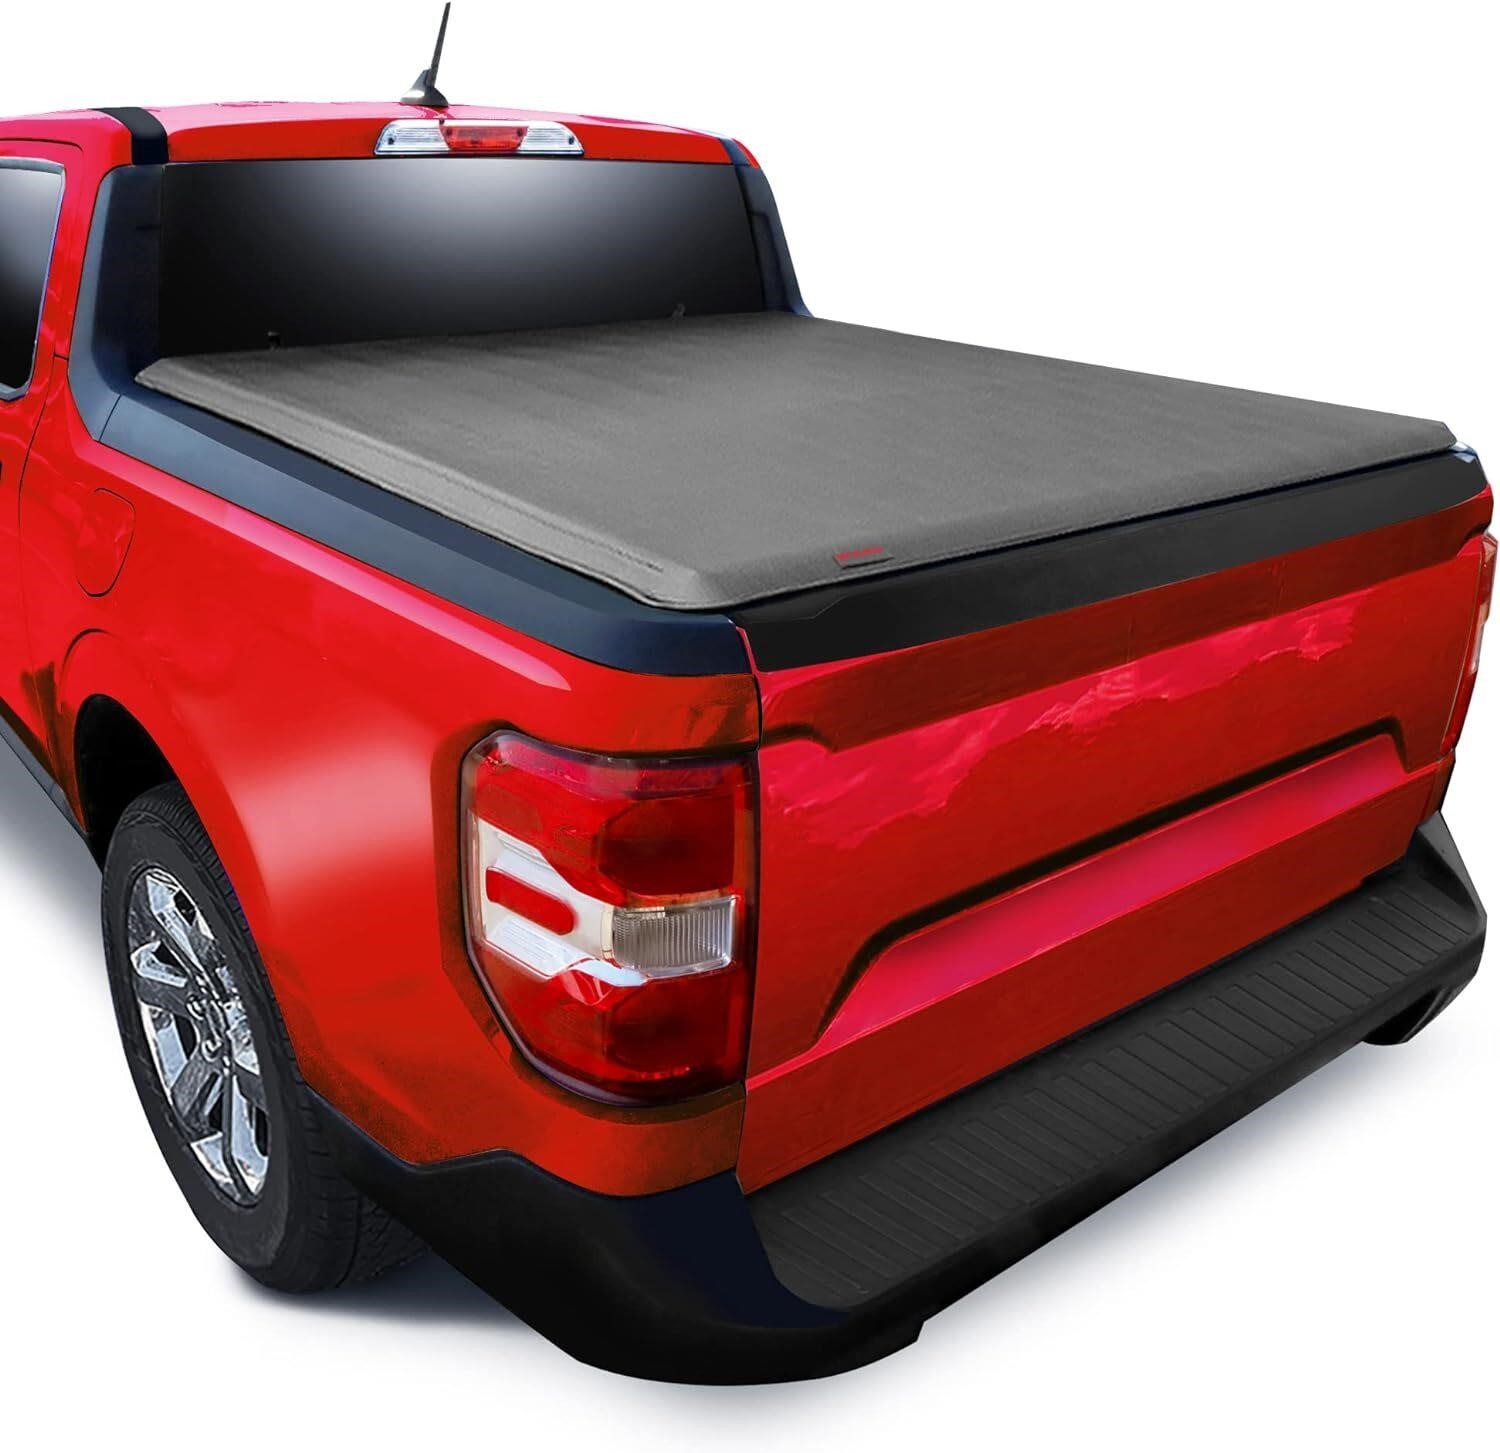 MaxMate Soft Roll Up Truck Bed Tonneau Cover